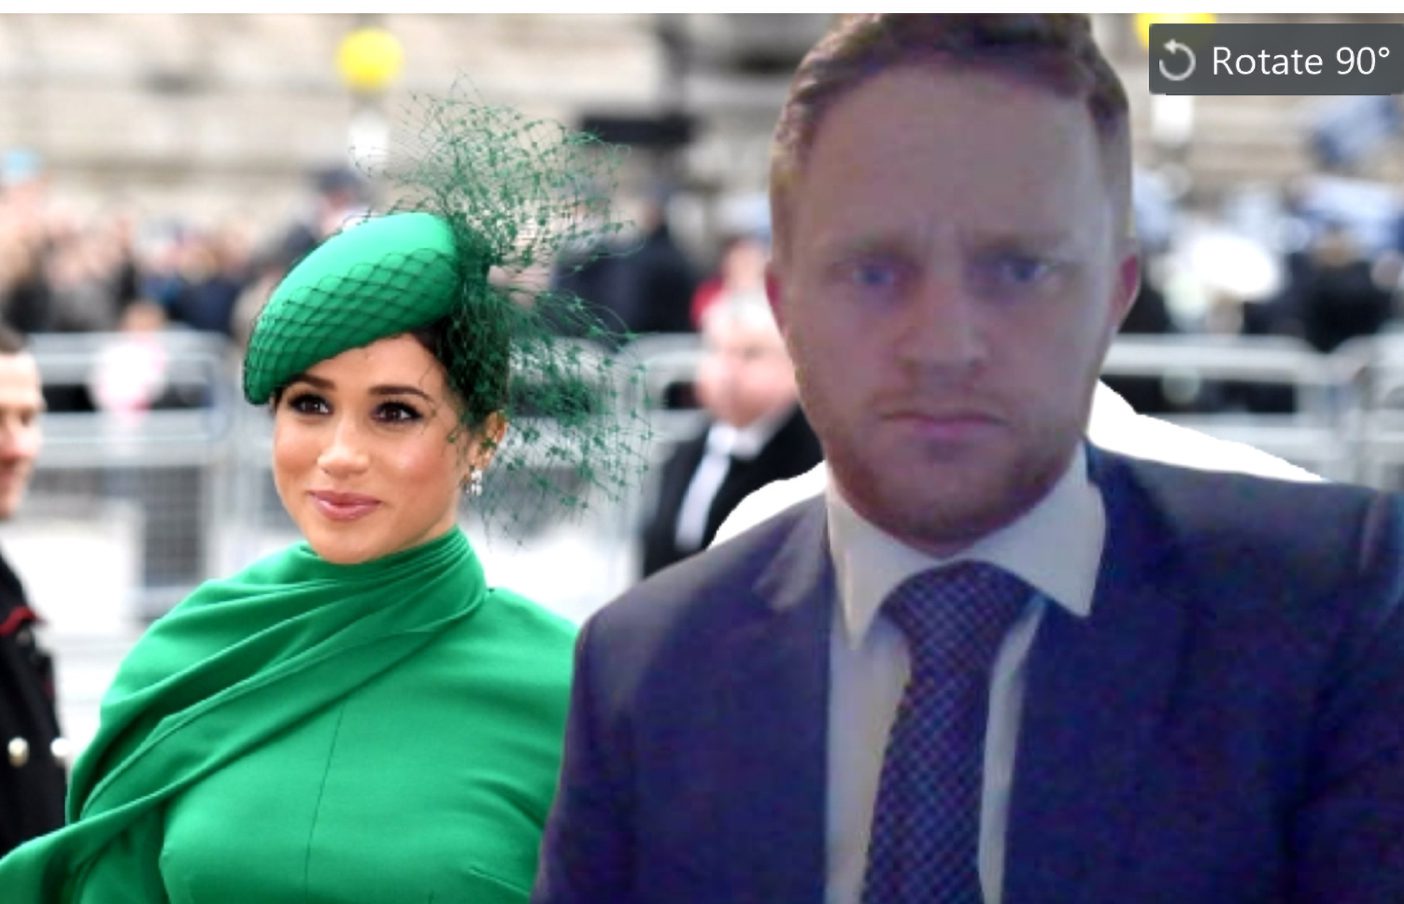 Trevor Lemmons dressed as a Prince on a Zoom call with a picture of Meghan Markle behind him.